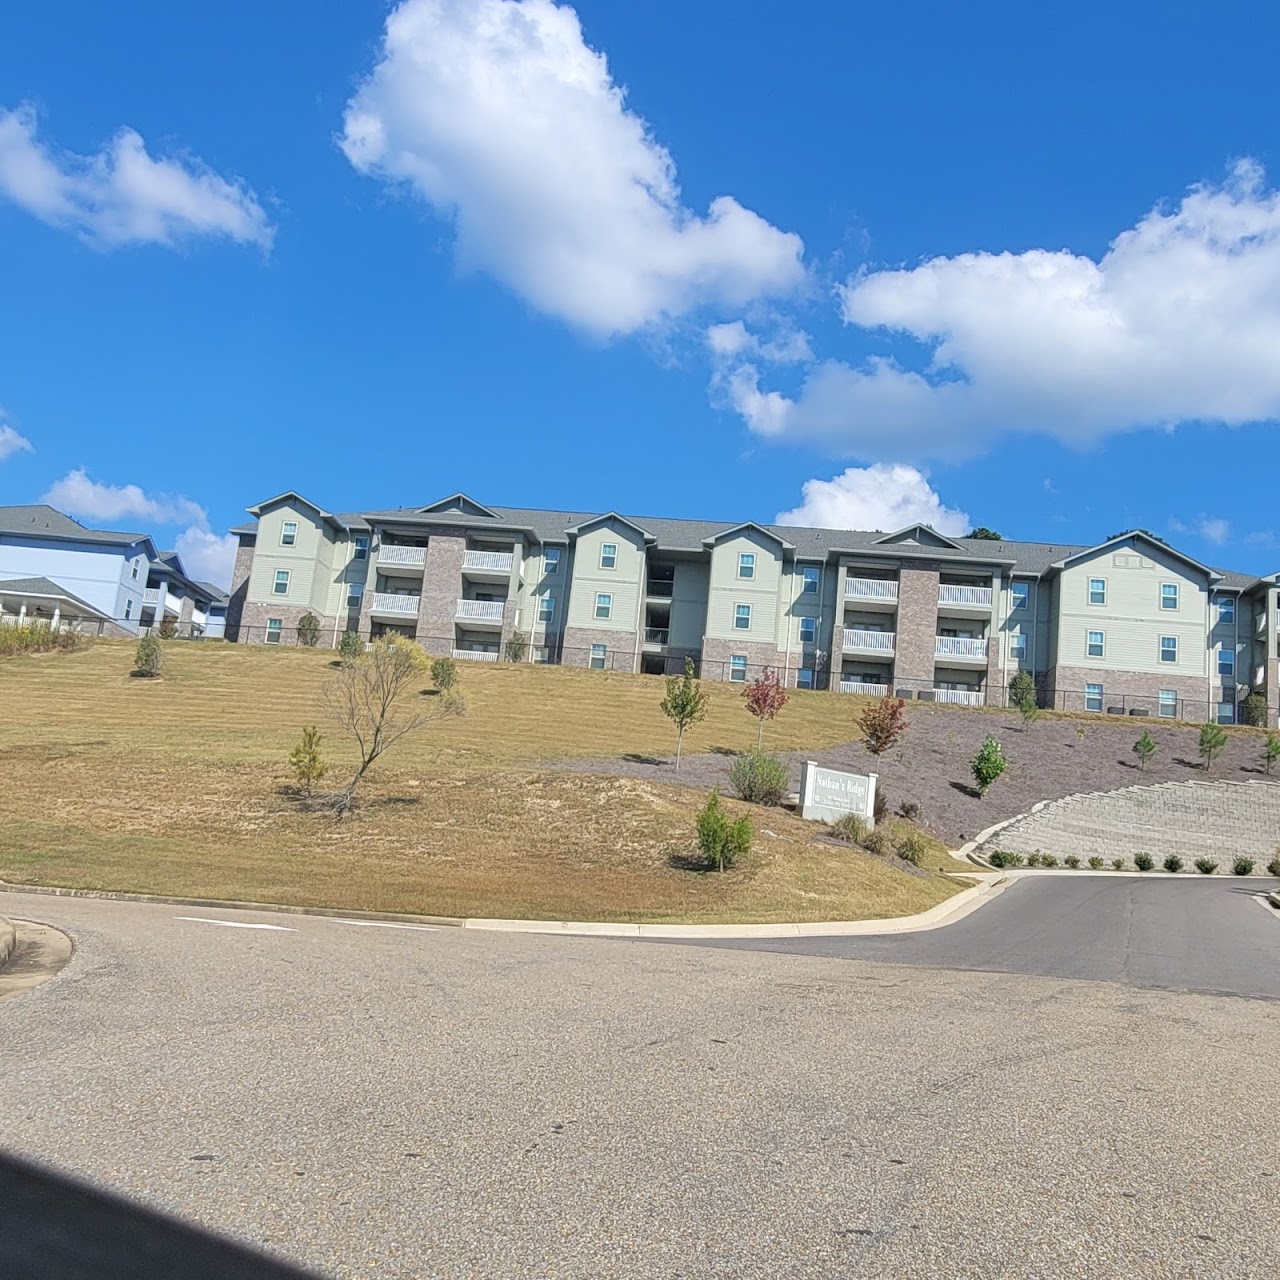 Photo of NATHAN'S RIDGE. Affordable housing located at 201 WELCH DRIVE WETUMPKA, AL 36093